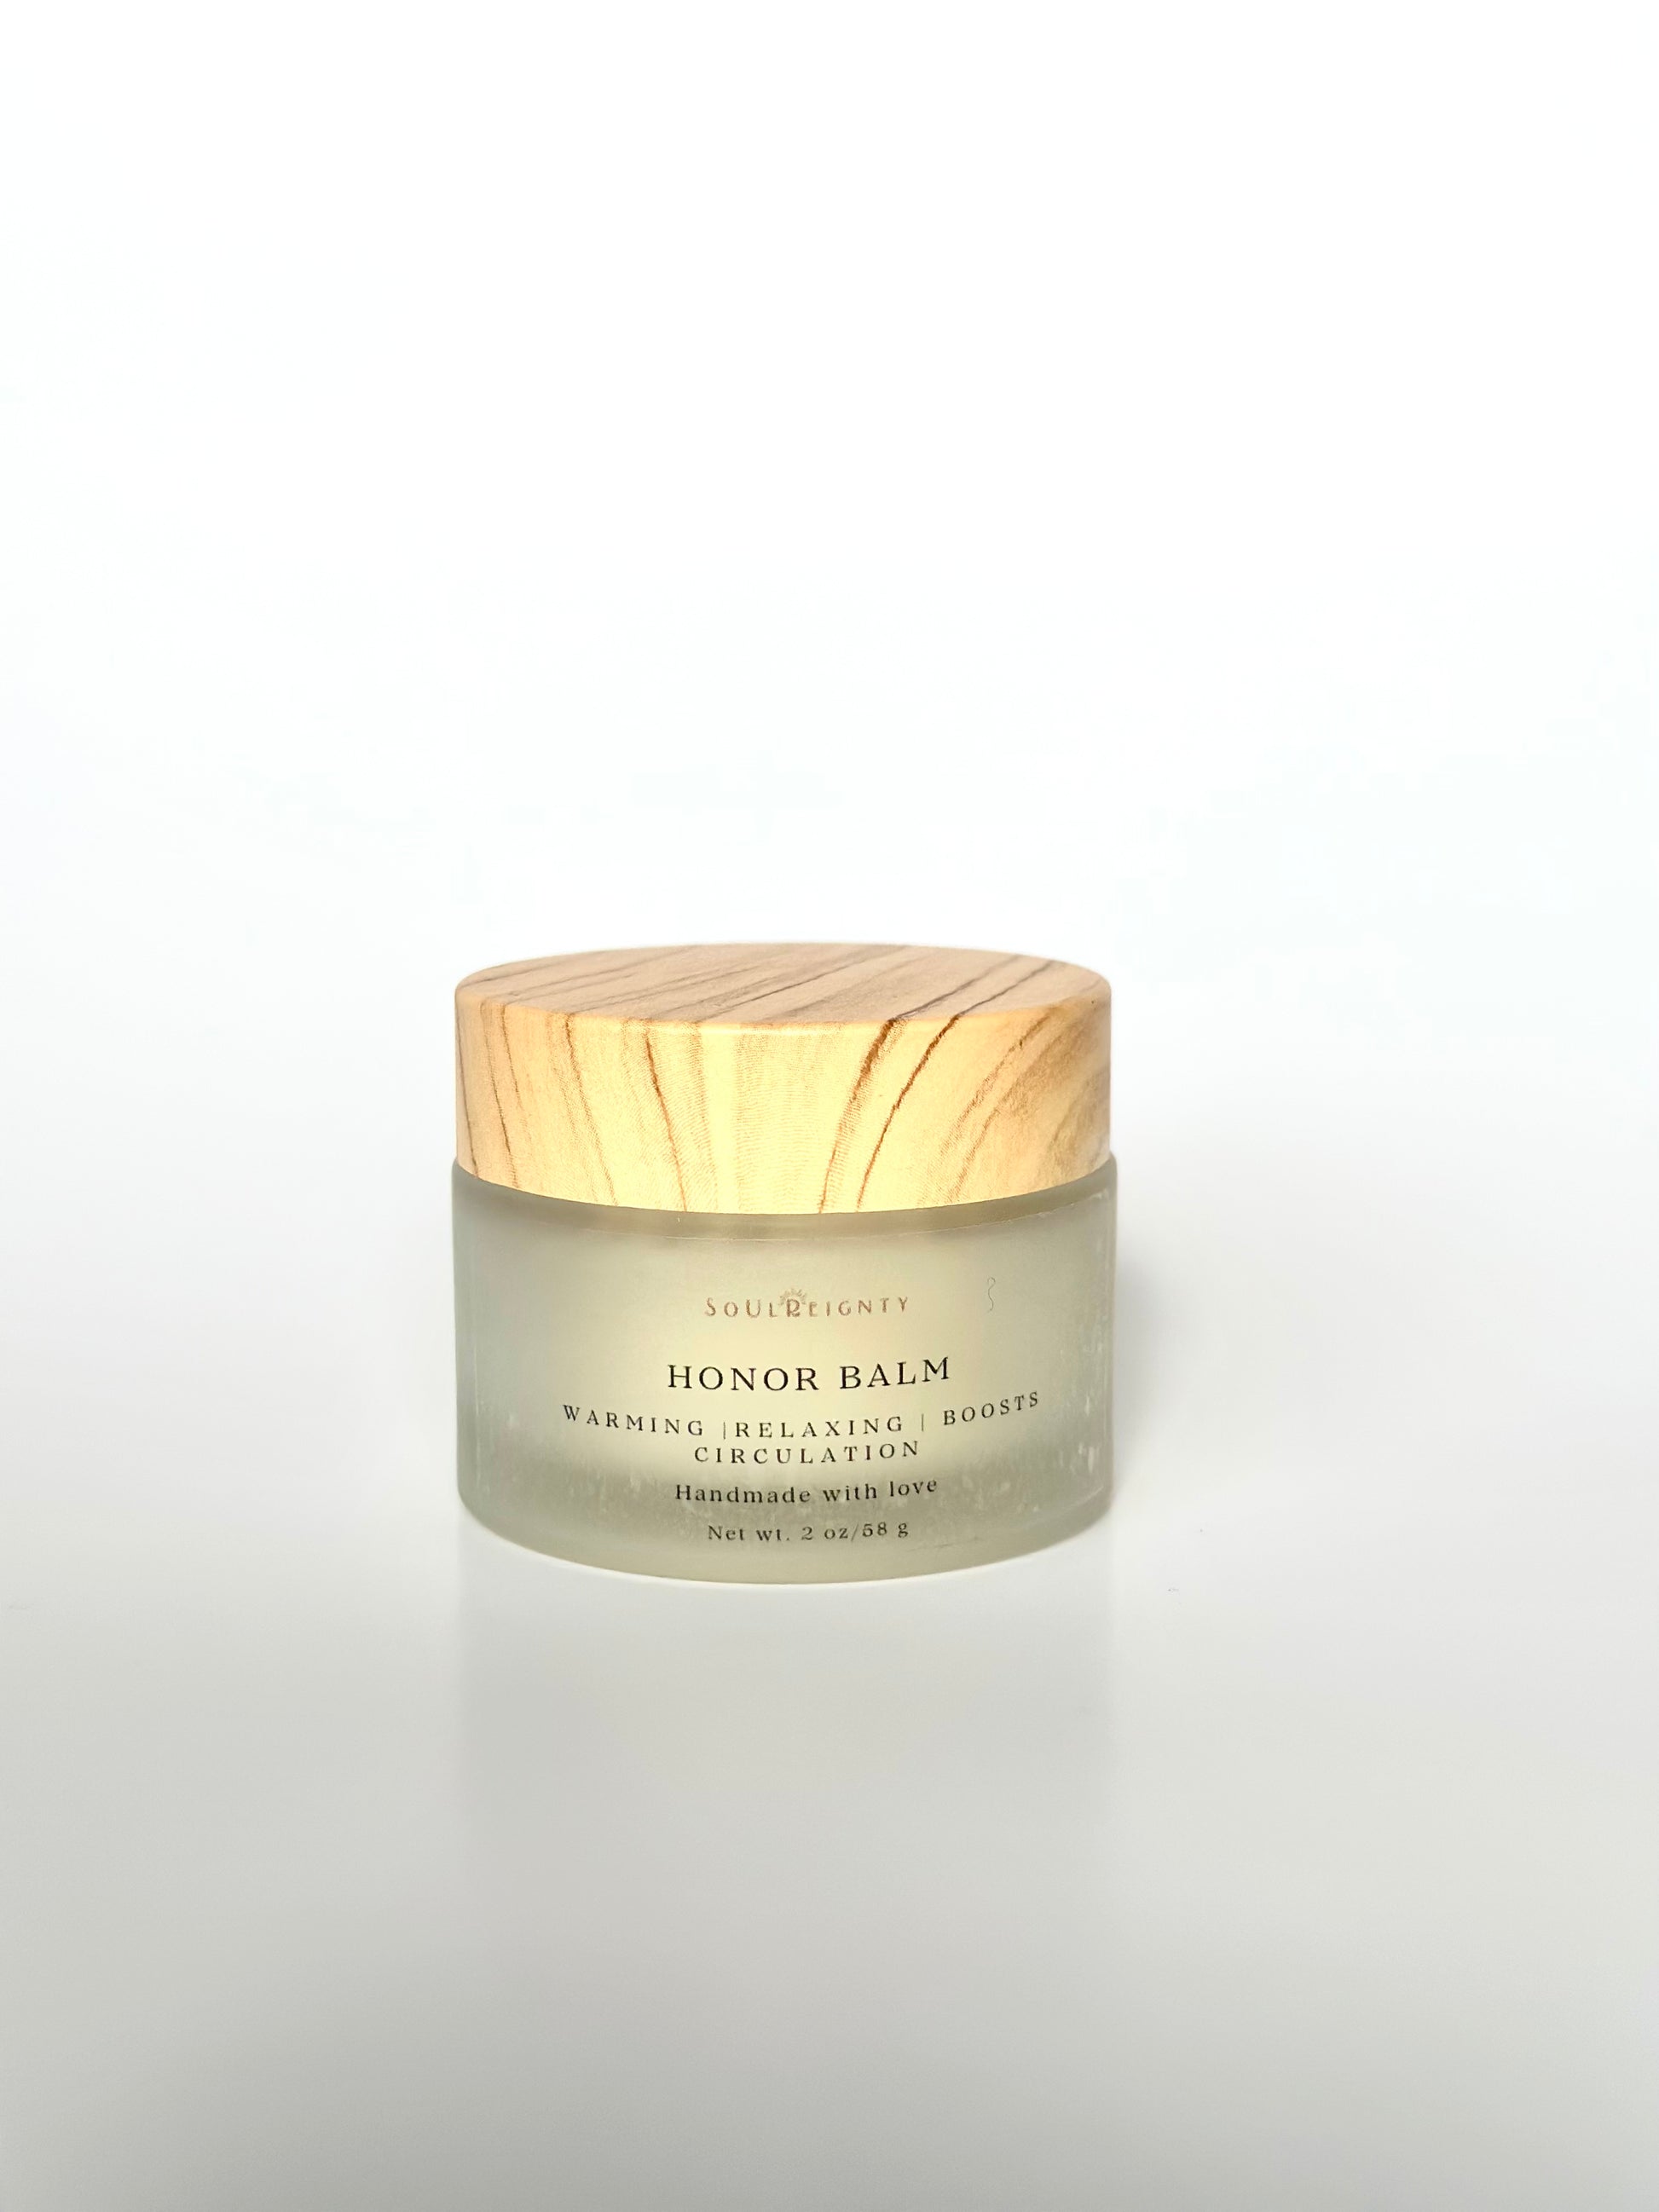 Abdominal massage balm handmade with organic ingredients, brings healing and warmth to the body.